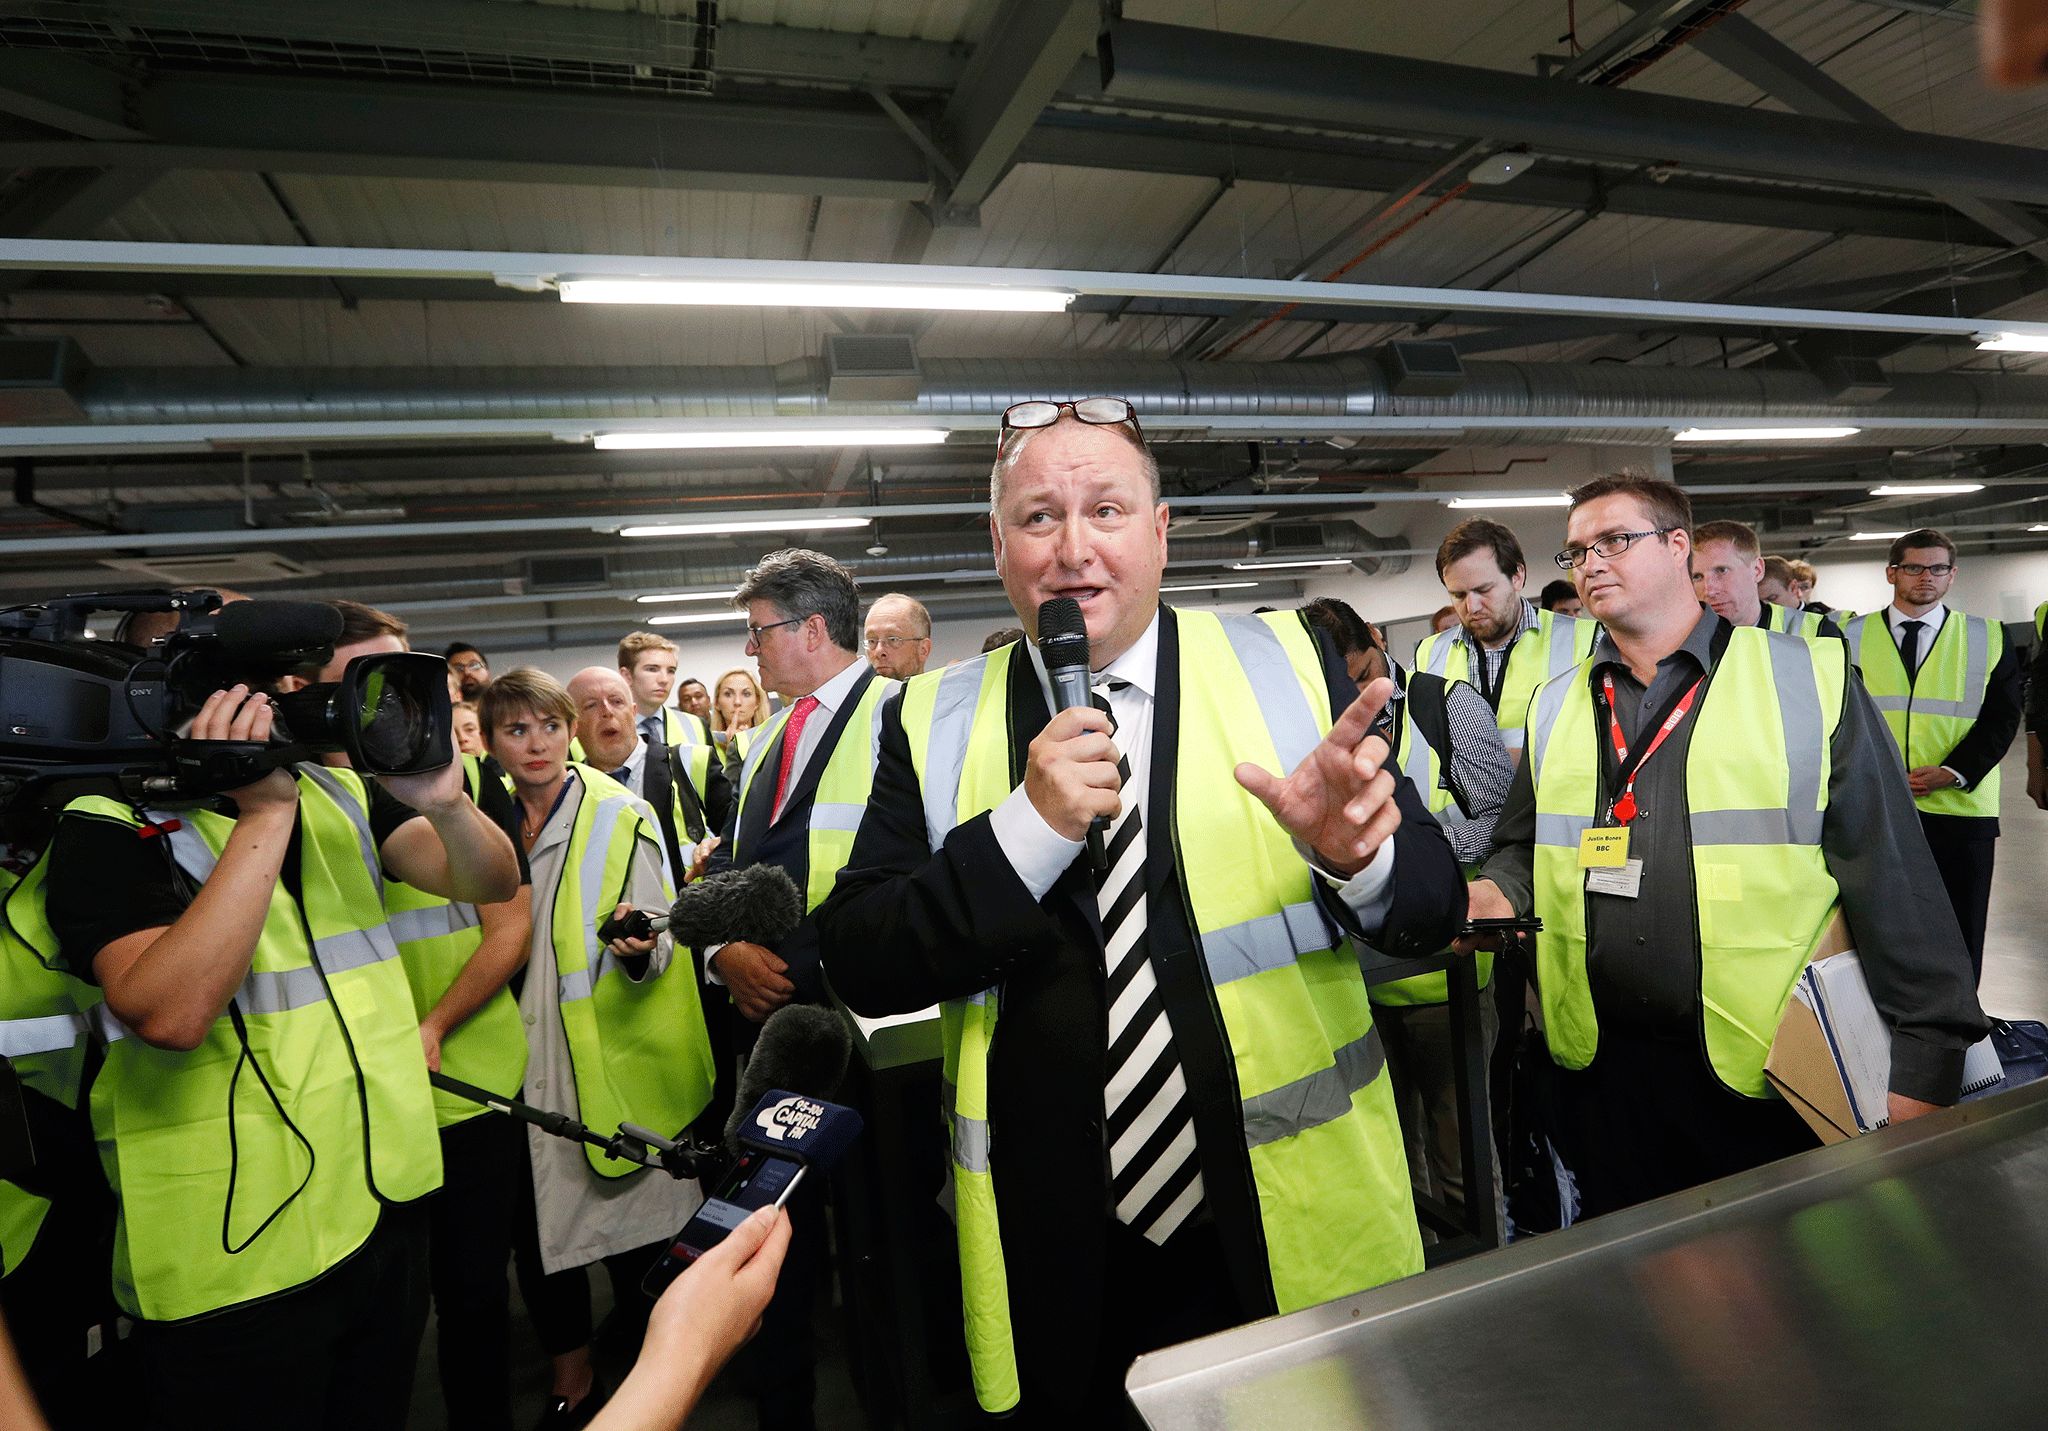 Mike Ashley talks to investors and journalists as he shows them round the company’s controversial Shirebrook plant after the company’s AGM.